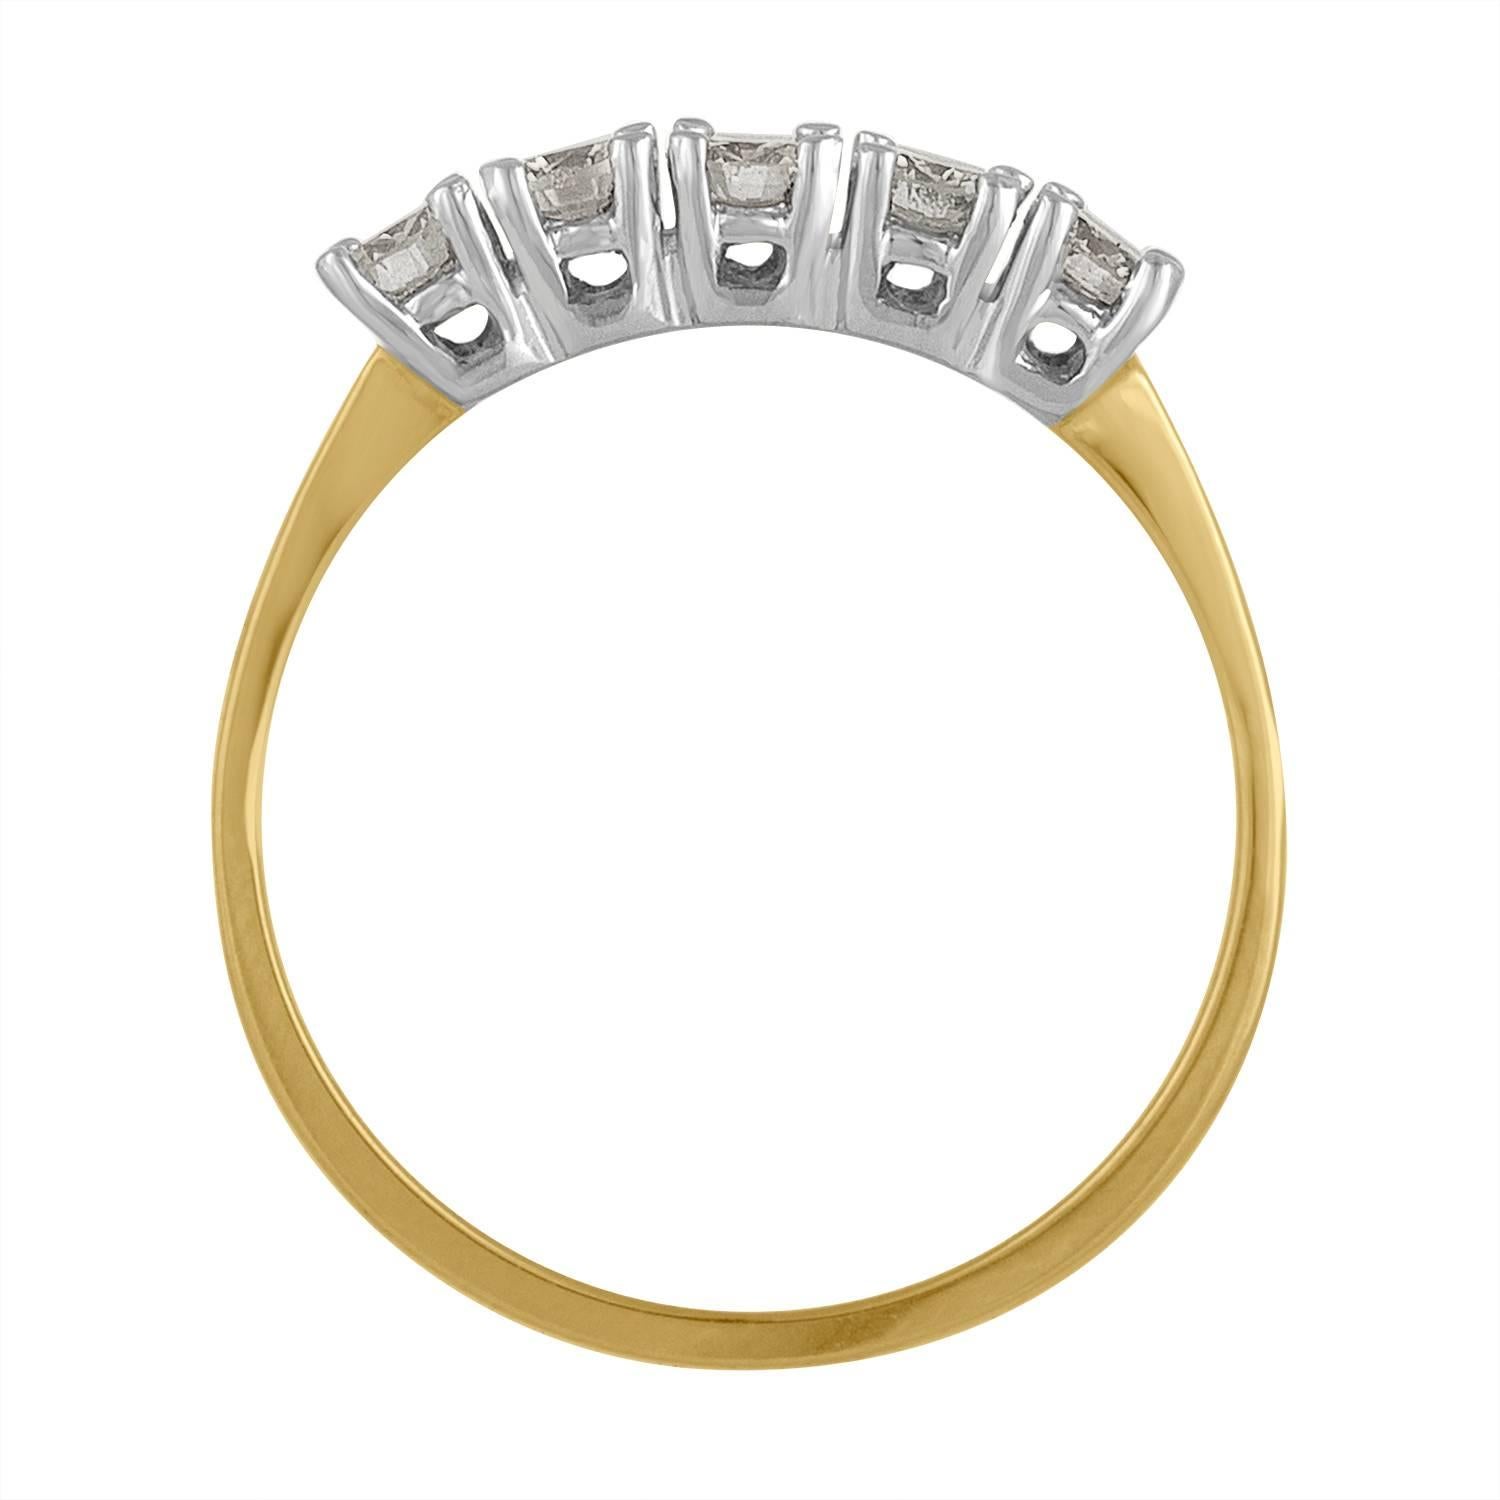 Classic Two Tone Diamonds Wedding Band with Five Diamonds Weight 0.50 Carat Total Weight.

Beautiful, Shiny and Sparkly Diamonds Estimated to be G in Color and VS in Clarity. 

The Band is 14 karat Yellow Gold, and the Diamonds are set in 14